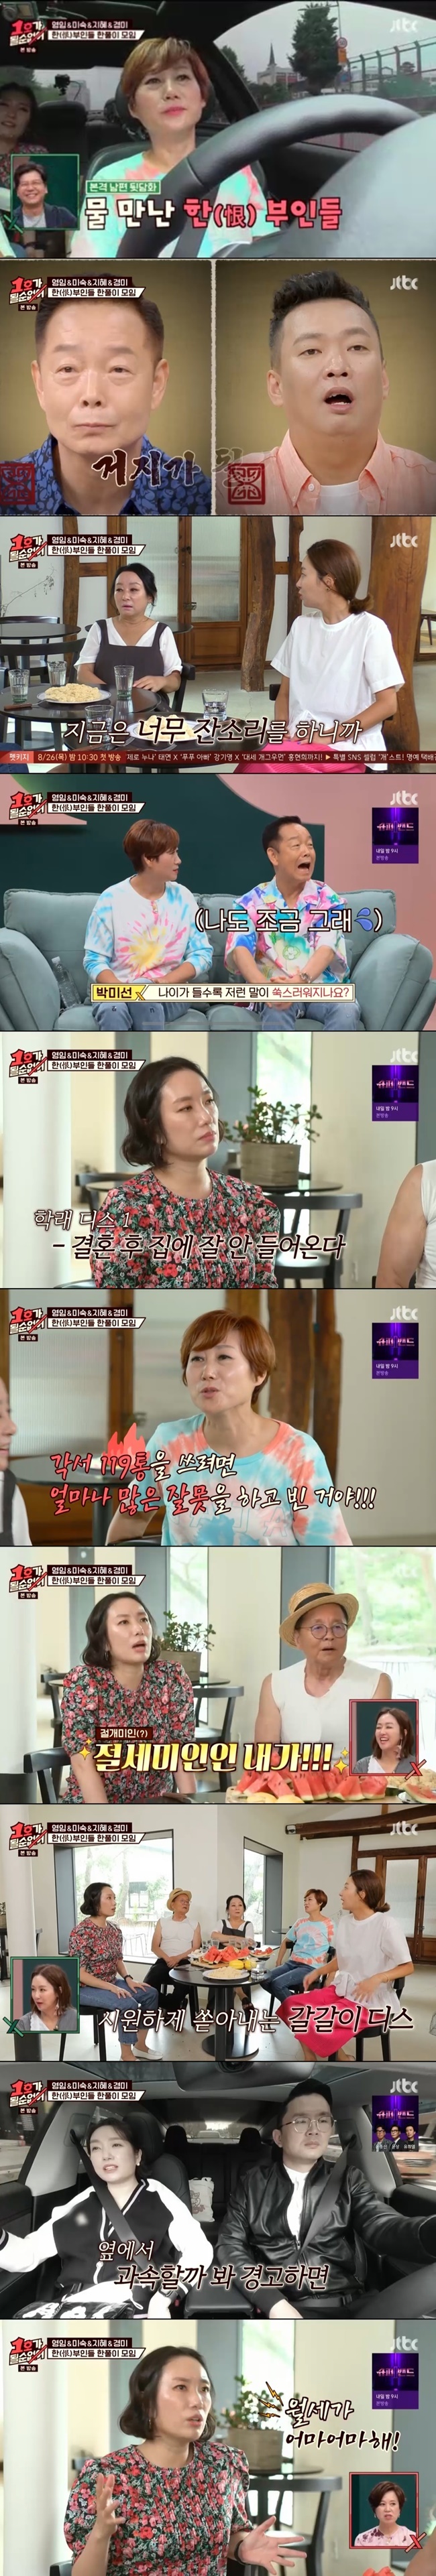 Gag Woman Im misuk has spoken to Husband Kim Hak-rae.JTBC Dont Be the First One!(hereinafter referred to as no.1), Im misuk, Kim Ji-hye, Jung Kyung-mi and Kim Young-im met and unravelled the accumulated amount to Husband.Im misuk said: People know that the slights live in rotting, and so does wisdom, and I am a woman with a lot of latitude.I gathered to solve the problem today, he said. I do not know when I will break it if I do not solve it. The three moved to their destination and started the Husband Dis. Im misuk said, The nose is a coronation where the money is lost.I have never made money, said Kim Ji-hye. I do not have a gap, so I do not have to gather and money flows down. The three visited Kim Young-im, the 42-year-old married man, who is living in various places. Im misuk said, I had an emotional divorce.Men rot unilaterally, said Kim Young-im. I was not interested in it before, but now I am too nagging. It is a narrow powder inspiration. Im misuk was unhappy when he heard that Lee Sang-hae called Kim Hak-rae and said, Why do you tell me you are here?I told him to live with my patience last time, but I should not do this. I did not forget it once a month, and I did my best today, thank you for saying I love you.I do not think the women feel different when I say that, and Kim Young-im made a face that was a first-hand story.Mr. Kim Hak-rae is married and does not come home well and has a huge debt. (debt) 1.9 billion won left.He wrote a memorandum. How wrong he was to live with 119. He also emphasizes his personal life.I thought I was half dead after I was silent, he said.Kim Ji-hye said, Once love is up and down, Husband always says that he should be treated because he has the advantage of love.Thats how love starts. Hes so proud of his good studies and good college. Hes so smug. The room looks like a parasite room.I will never clean up the crumbs of cookies. If I say the problem is strange, I will brainwash you if you can meet a man like me. I just bought a car and I think Husband wanted to drive it. The speeding camera is huge, but its not my car.Im also trying to expand my business. The Corona 19 took two years off from the concert hall, and the monthly rent is enormous and the salary of the employees continues to go on.But he wants to build a pension in the world of live commerce, Tsushima, and he doesnt know about me. I do everything, and I dont know anything.I do not even wash dishes, I do not wash dishes, and Im Misuk was surprised that I am a big brother.Kim Young-im said, I have everything (weird) that the three people did. I go out at dawn and dawn comes. My colleagues and juniors come to my house 20-30.I called at 2:00 a.m. and baked ribs. I was overwhelmed. I was stressed. I lost 48kg.I put food in, and I first felt like sandballs. Tears were pouring and facial paralysis. I went to the hospital in the evening.I went to the car with a scarf and the women carried a bag and cremated and passed by, and I wanted to do it. If a person makes you too hard, it seems to come to you. After decades of age, there is no one like Husband.My sisters will have a good day if they live a little longer. 